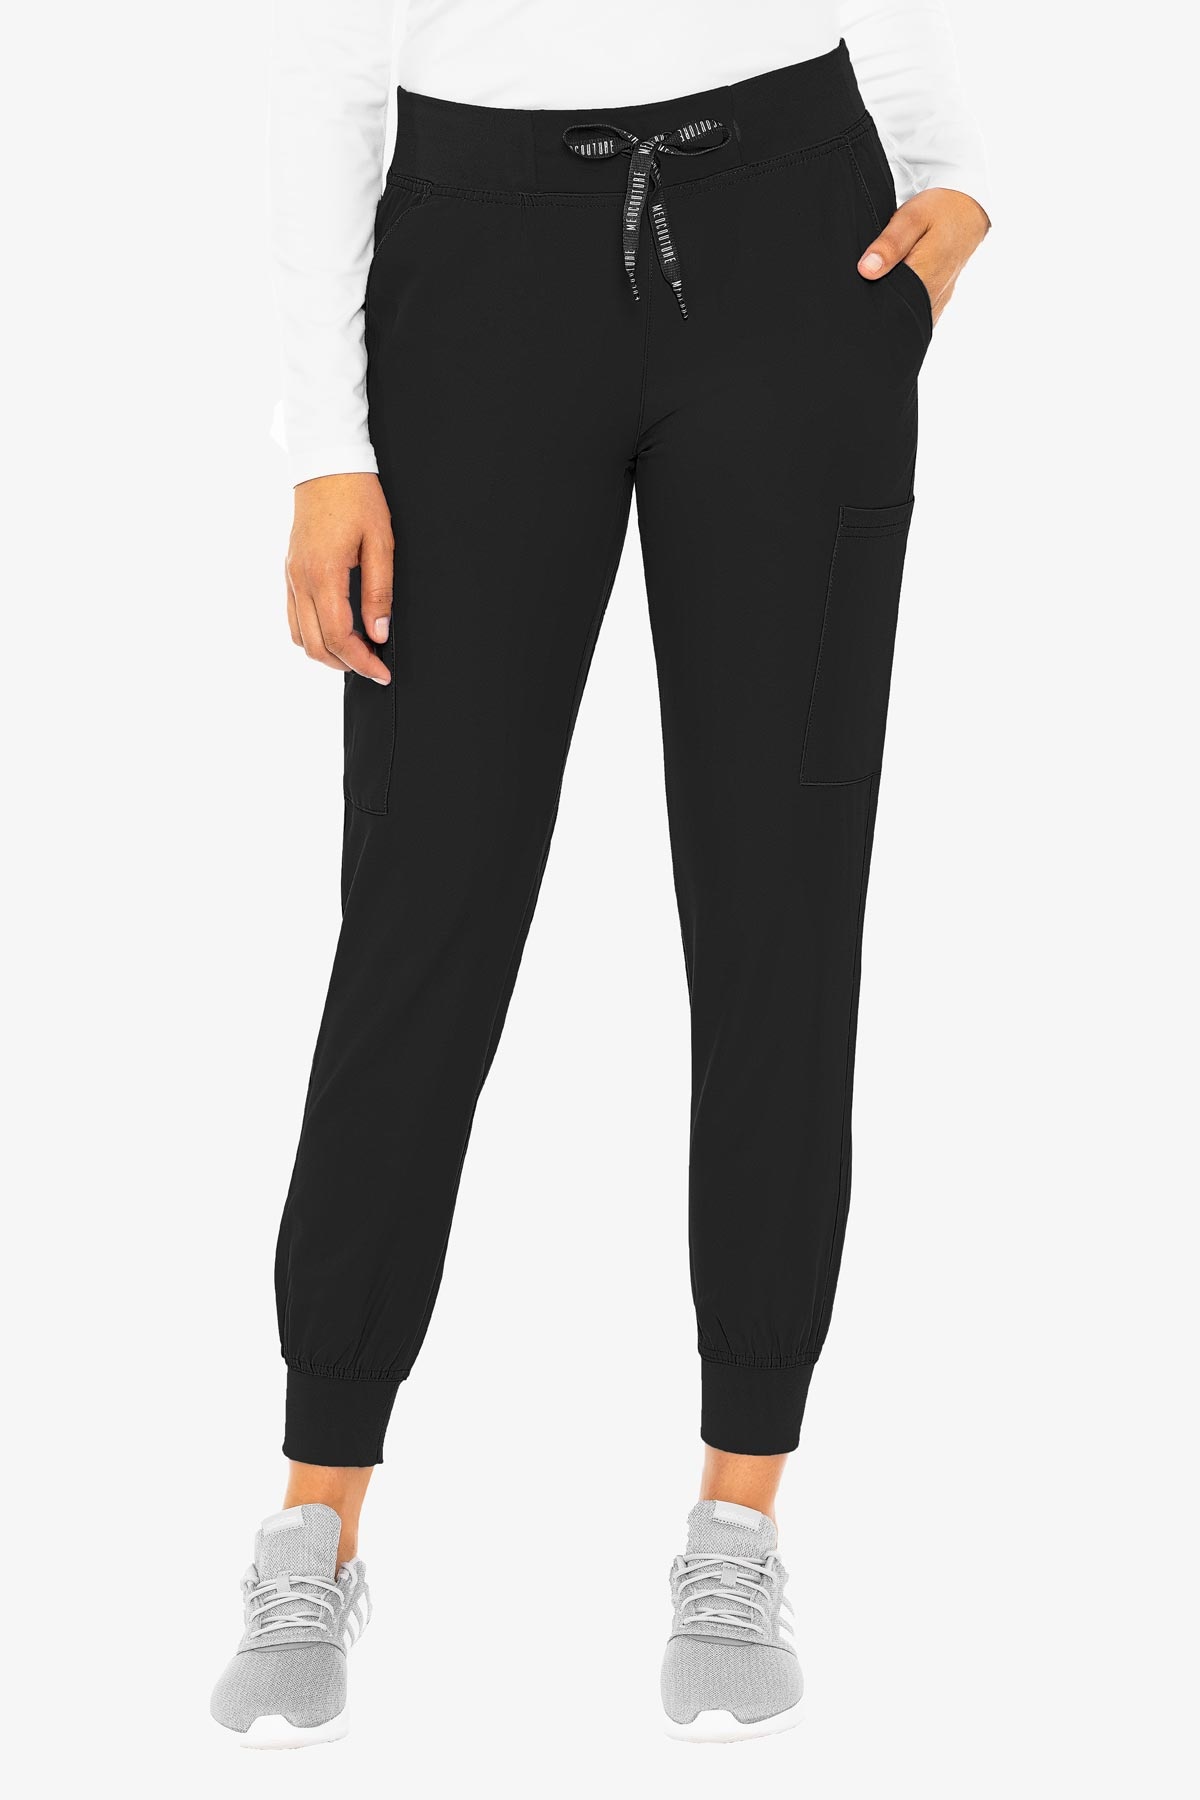 Med Couture Insight Women's Jogger Pant (Tall)